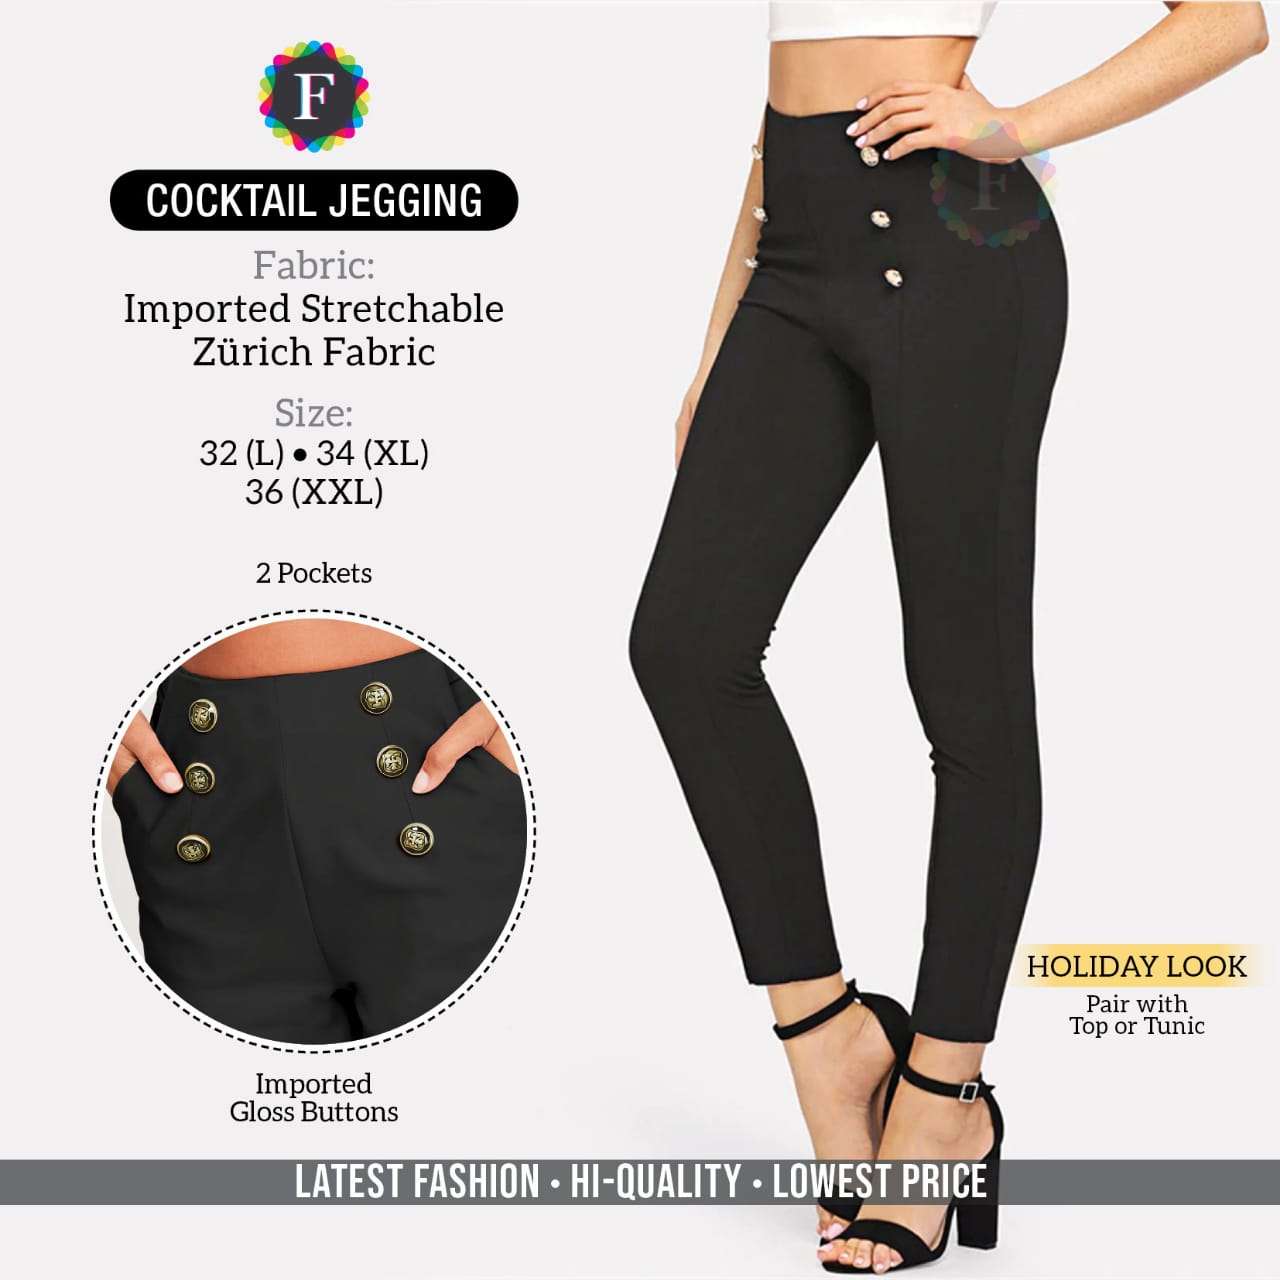 COCKTAIL JEGGING BY FIESTA BEAUTIFUL STYLISH FANCY COLORFUL READY TO WEAR & CASUAL WEAR STRETCHABLE JEGGINGS AT WHOLESALE PRICE